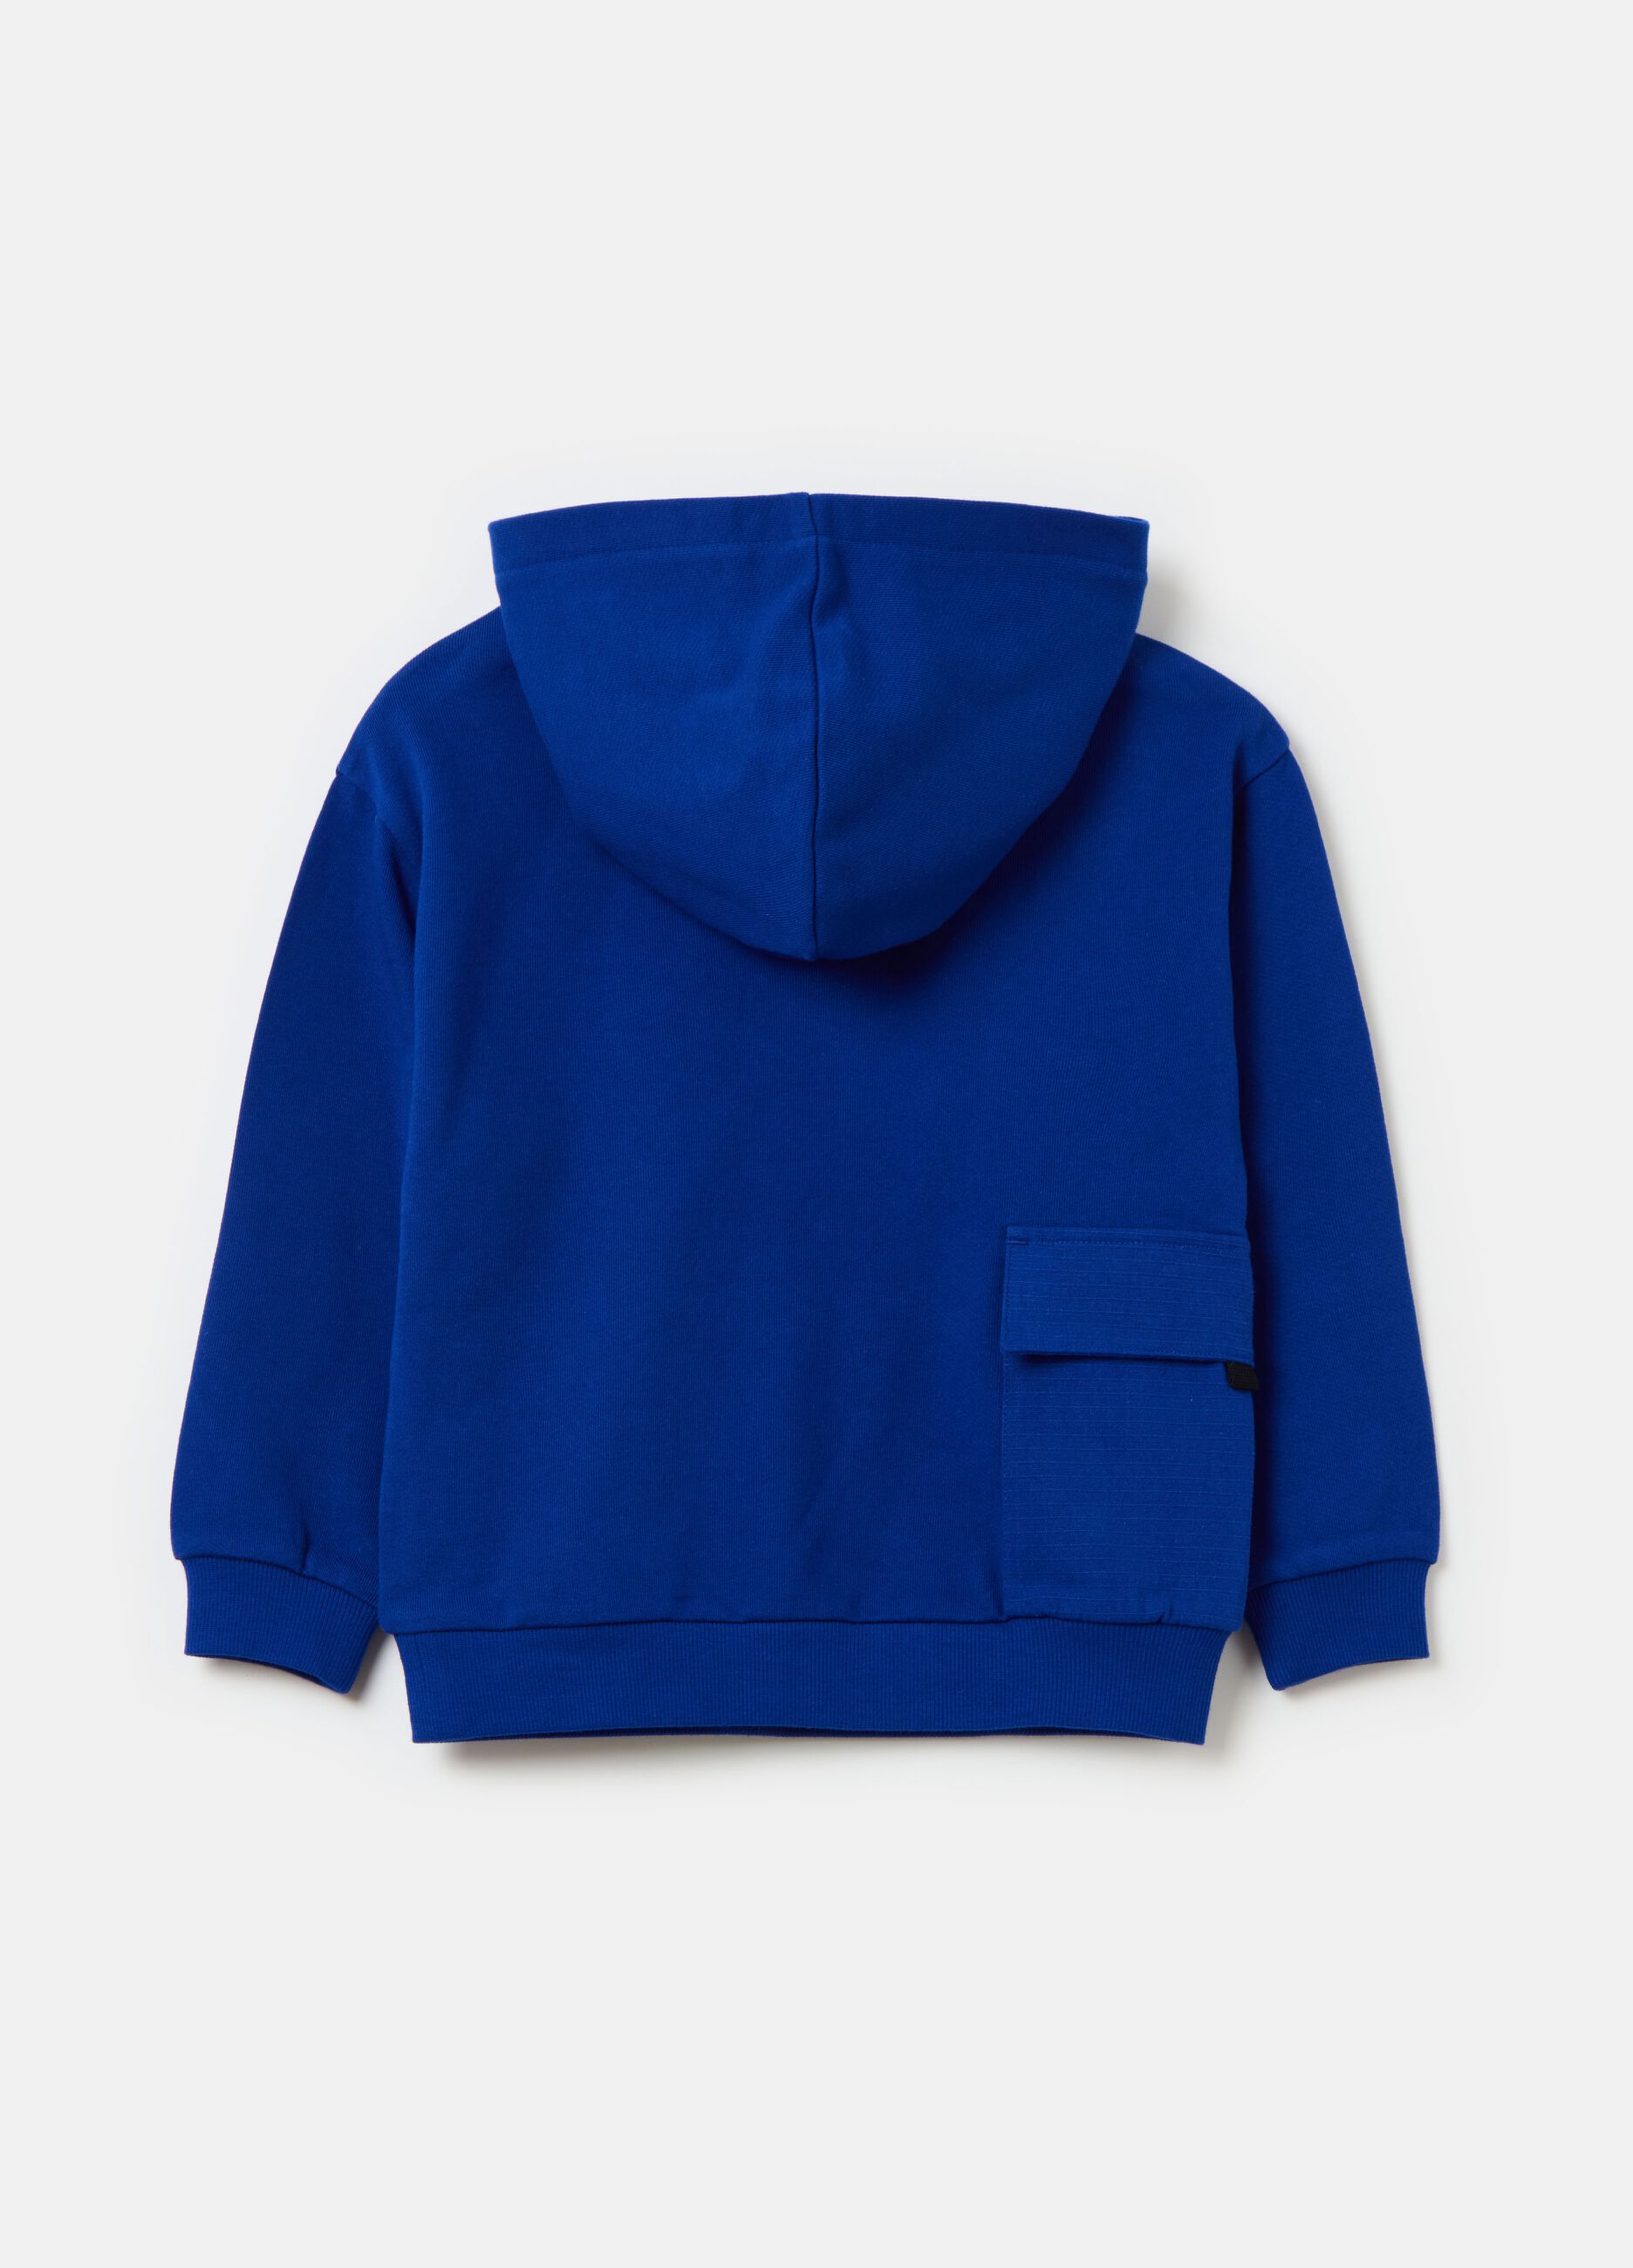 French terry sweatshirt with hood and pocket